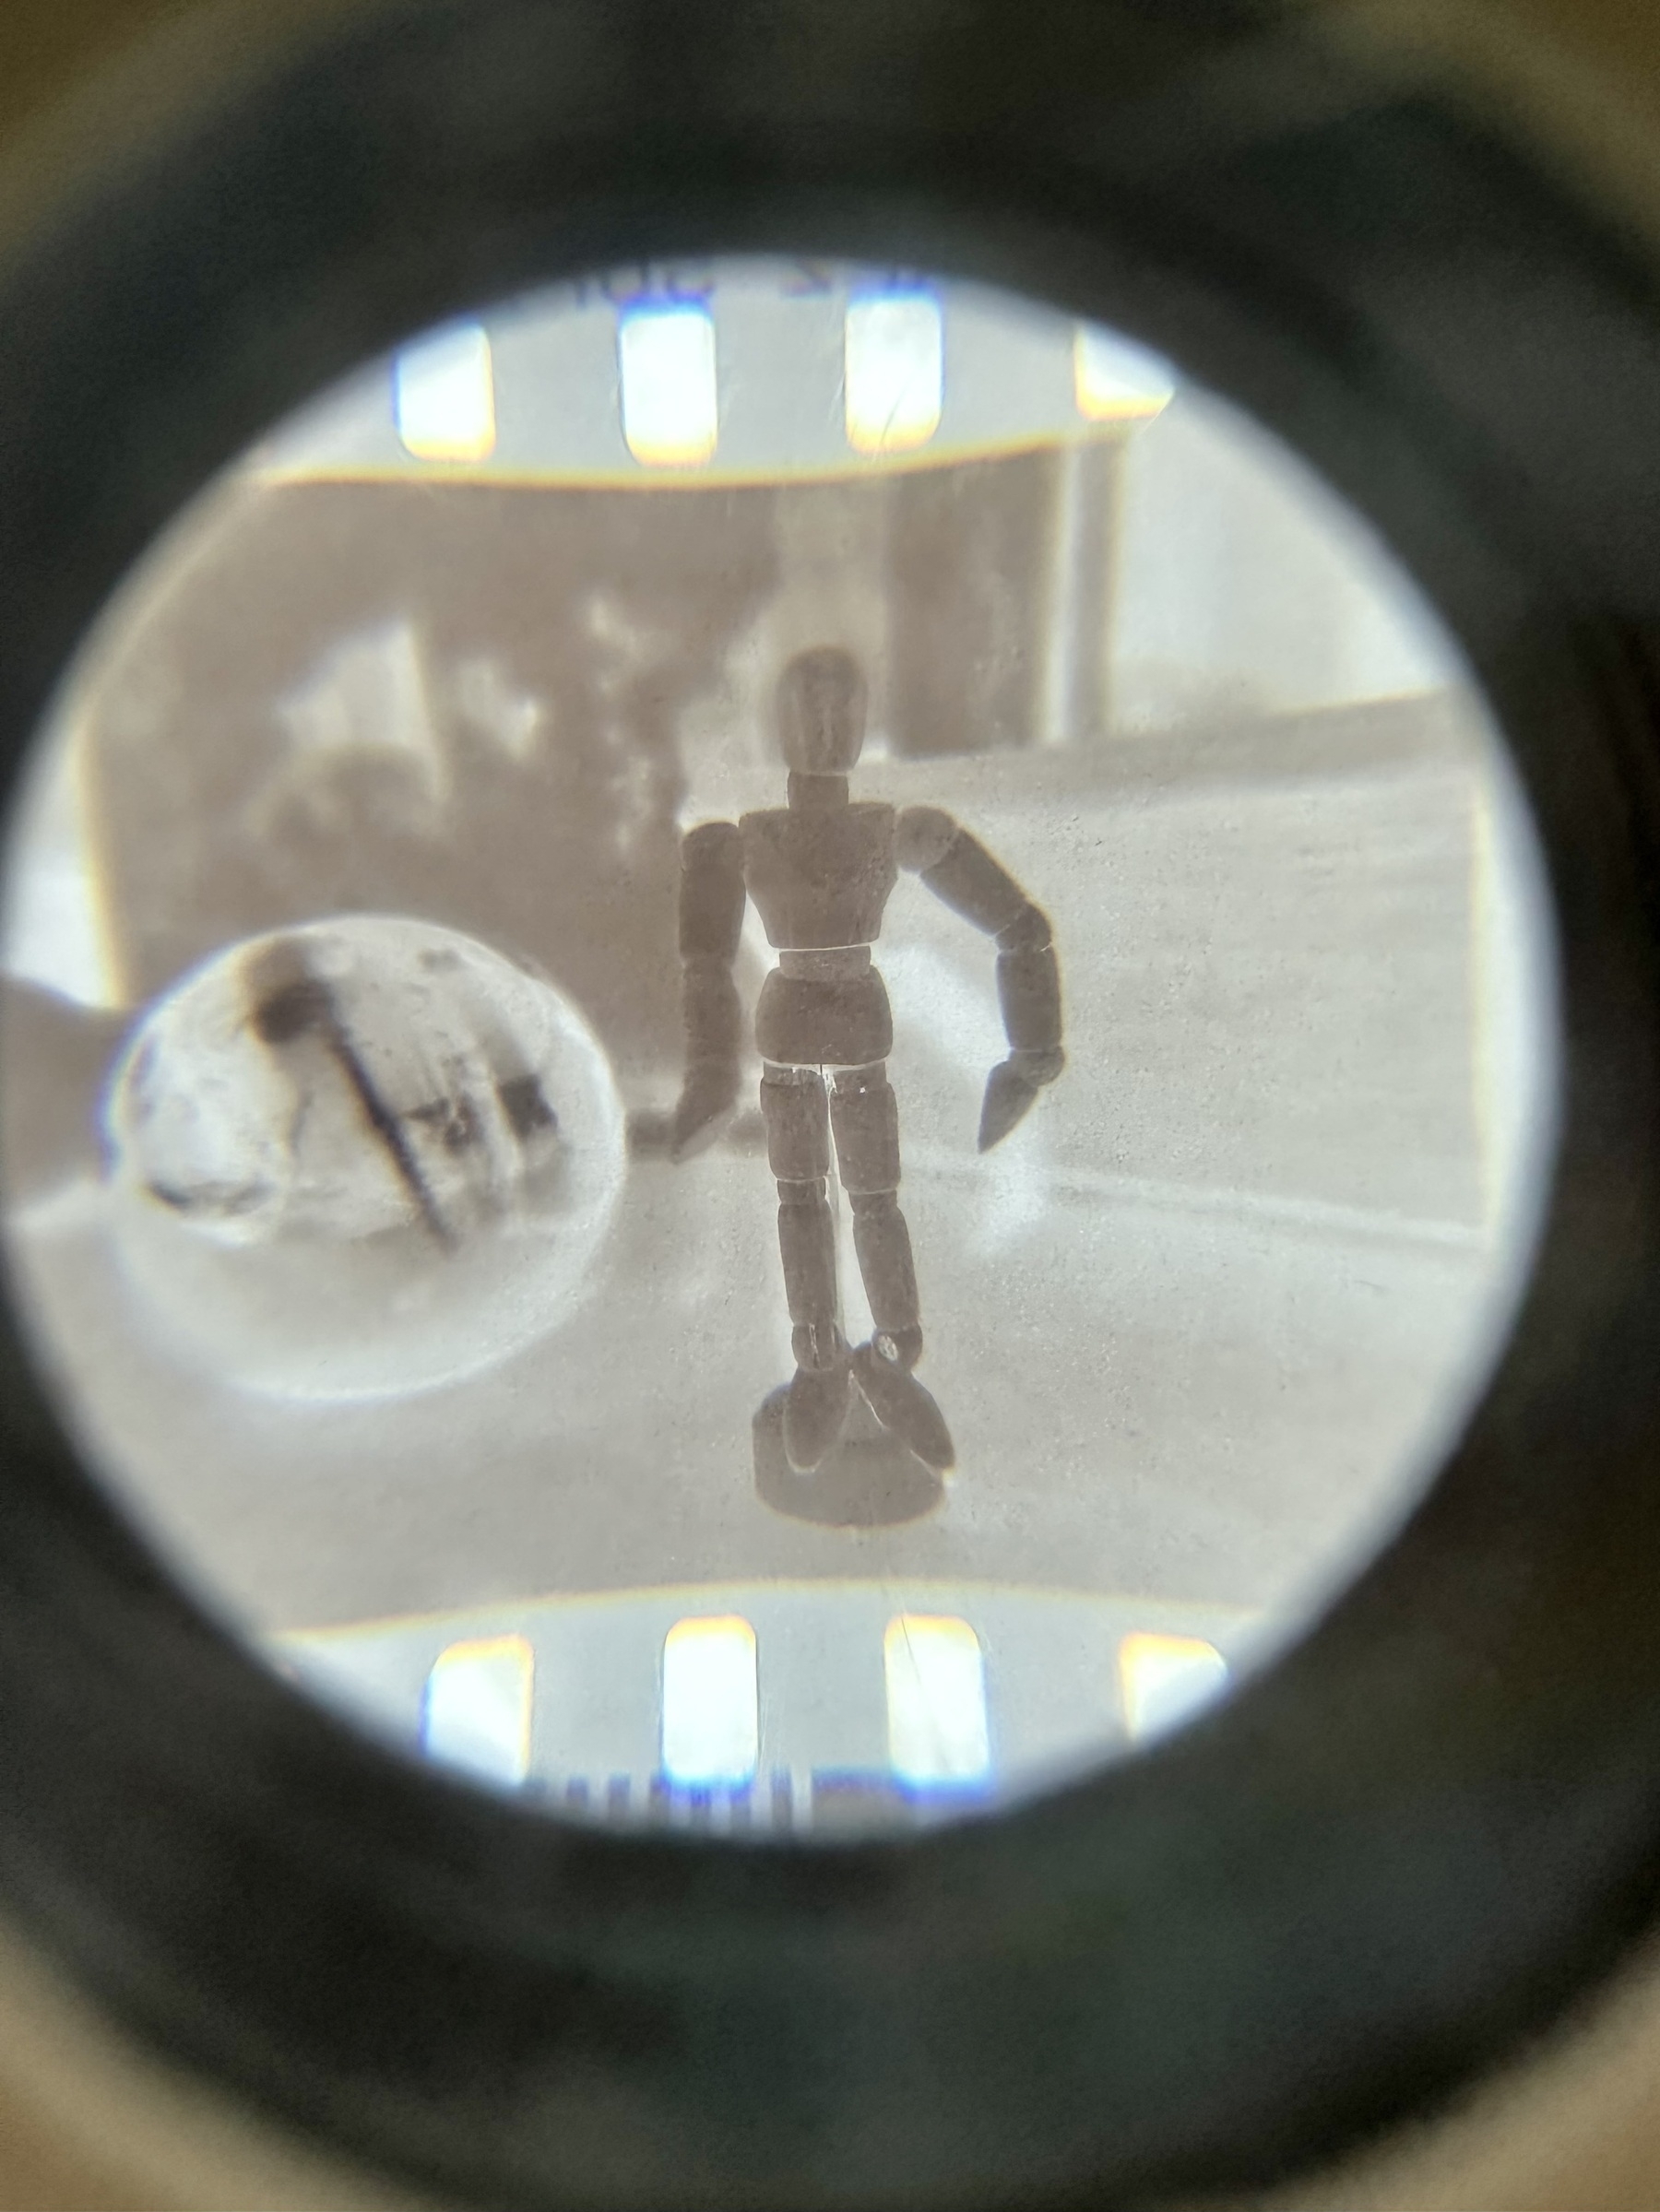 A negative of a photo of a wooden figure of a human, seen through a magnifying loupe.